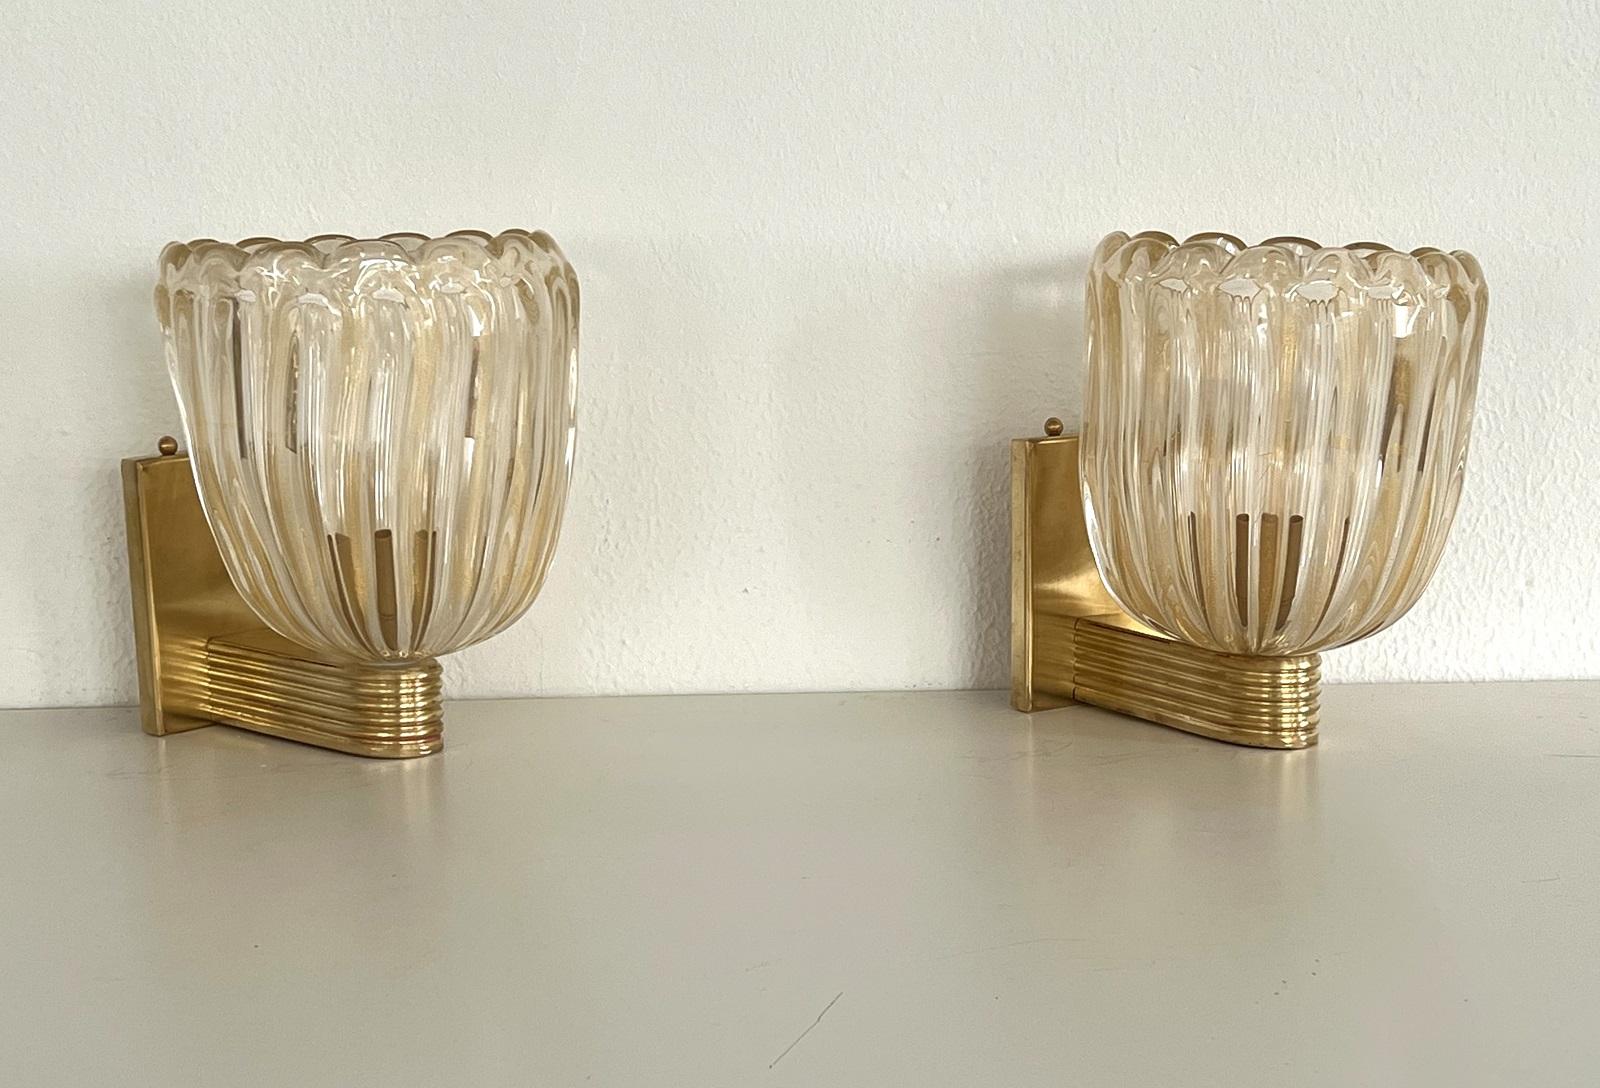 Italian Brass and Murano Glass Wall Lights or Sconces in Art Deco Style, 1990s For Sale 7